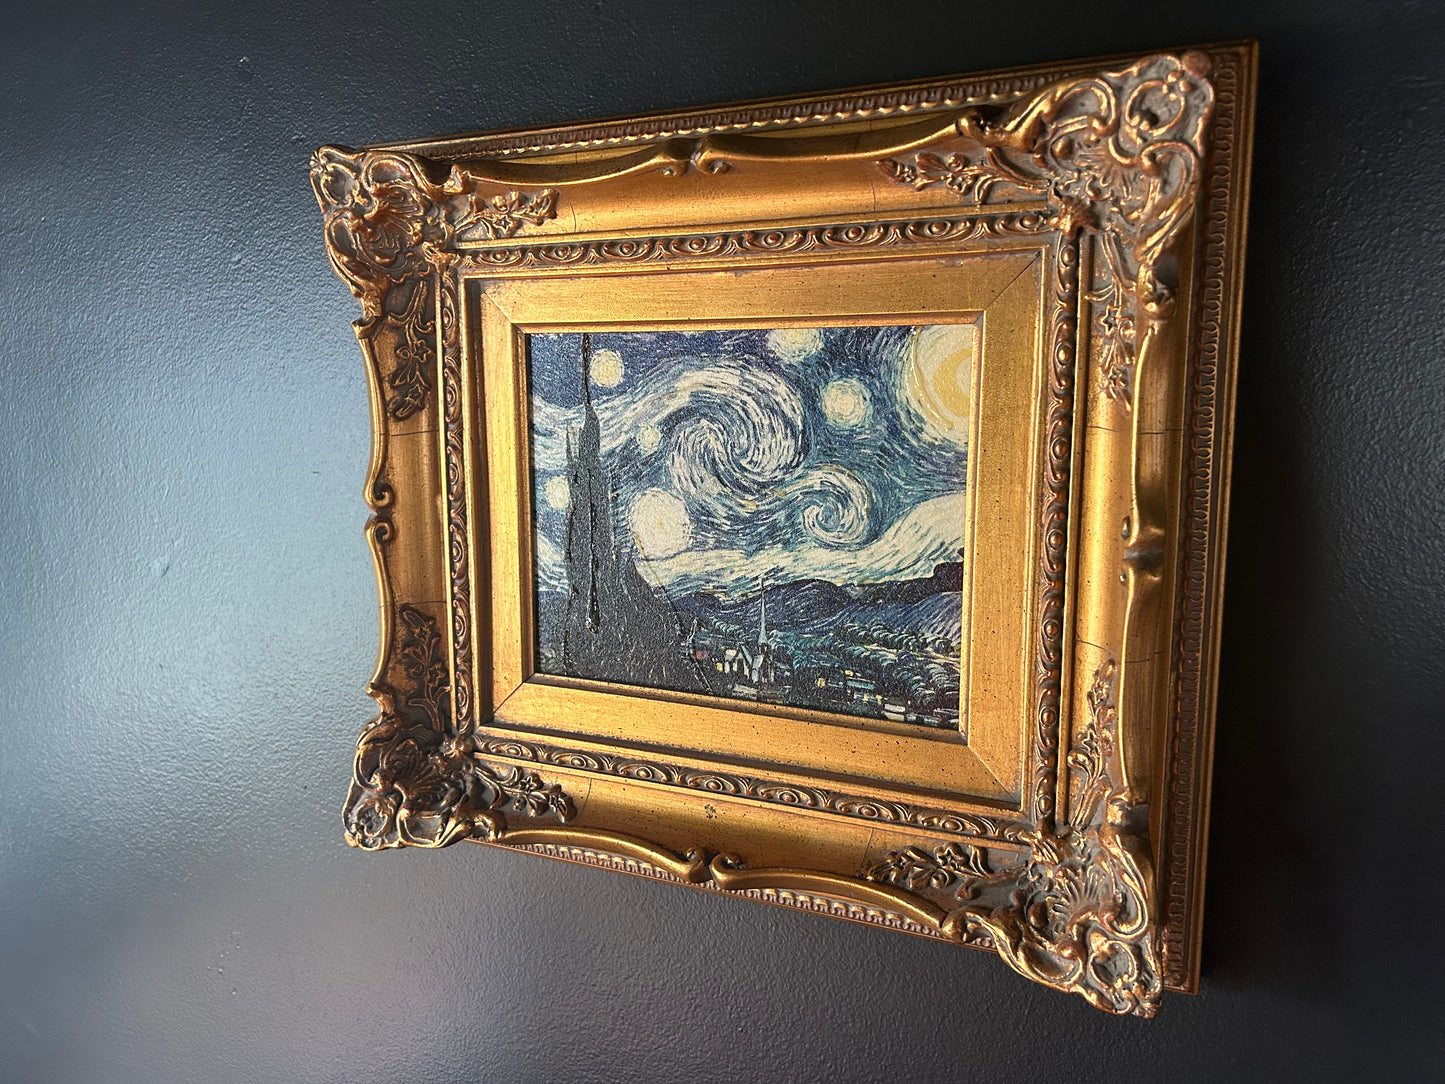 Van Gogh 'Starry Night' reproduction with gilded frame